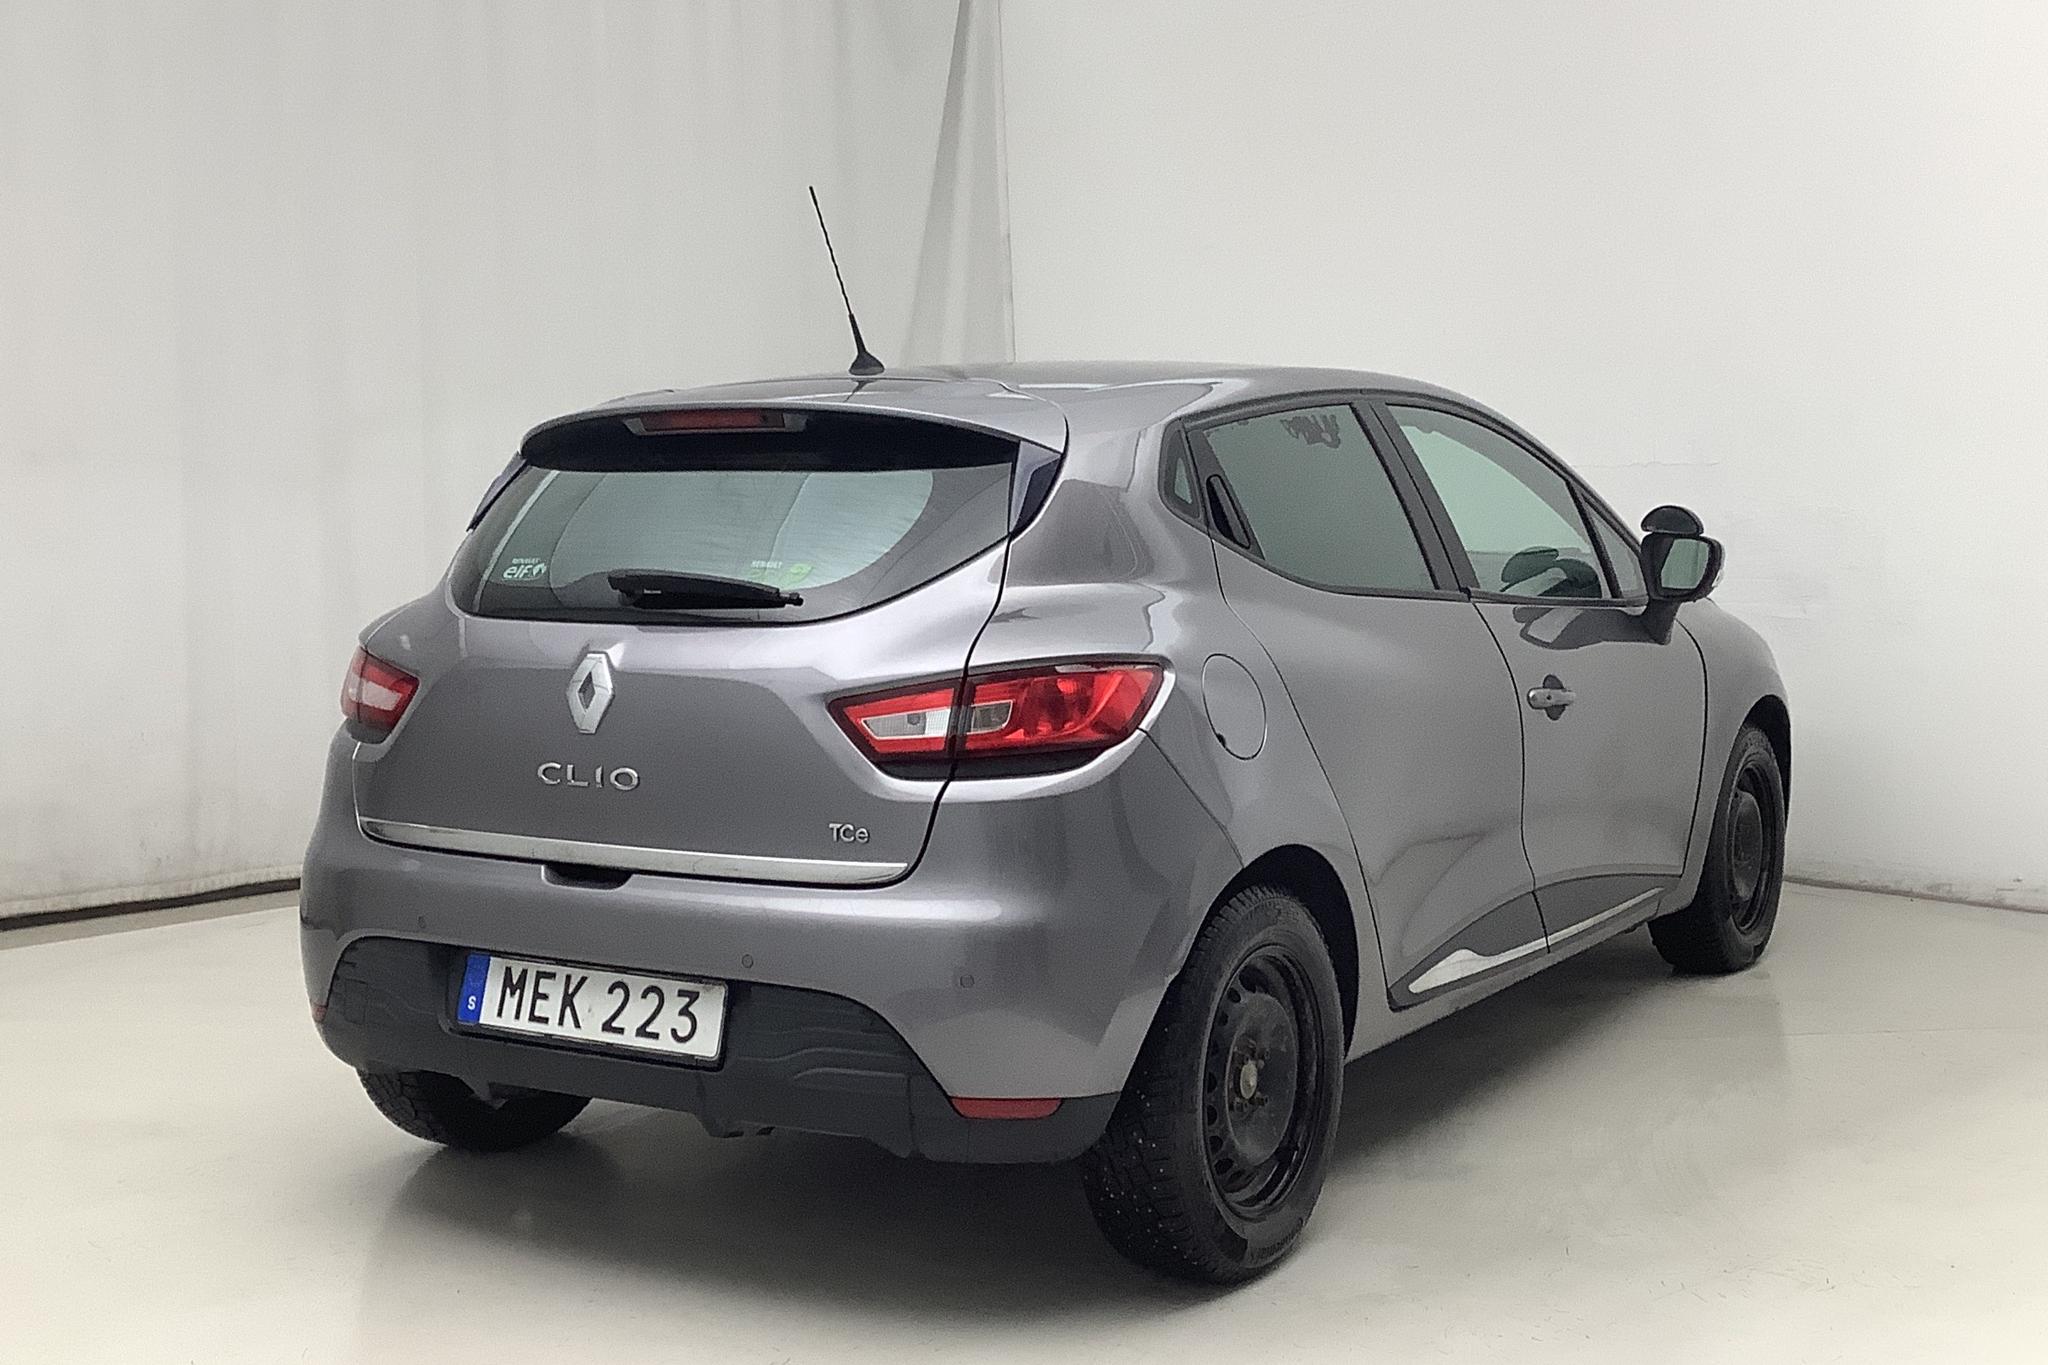 Renault Clio IV 0.9 TCe 90 5dr (90hk) - 78 460 km - Manual - gray - 2016